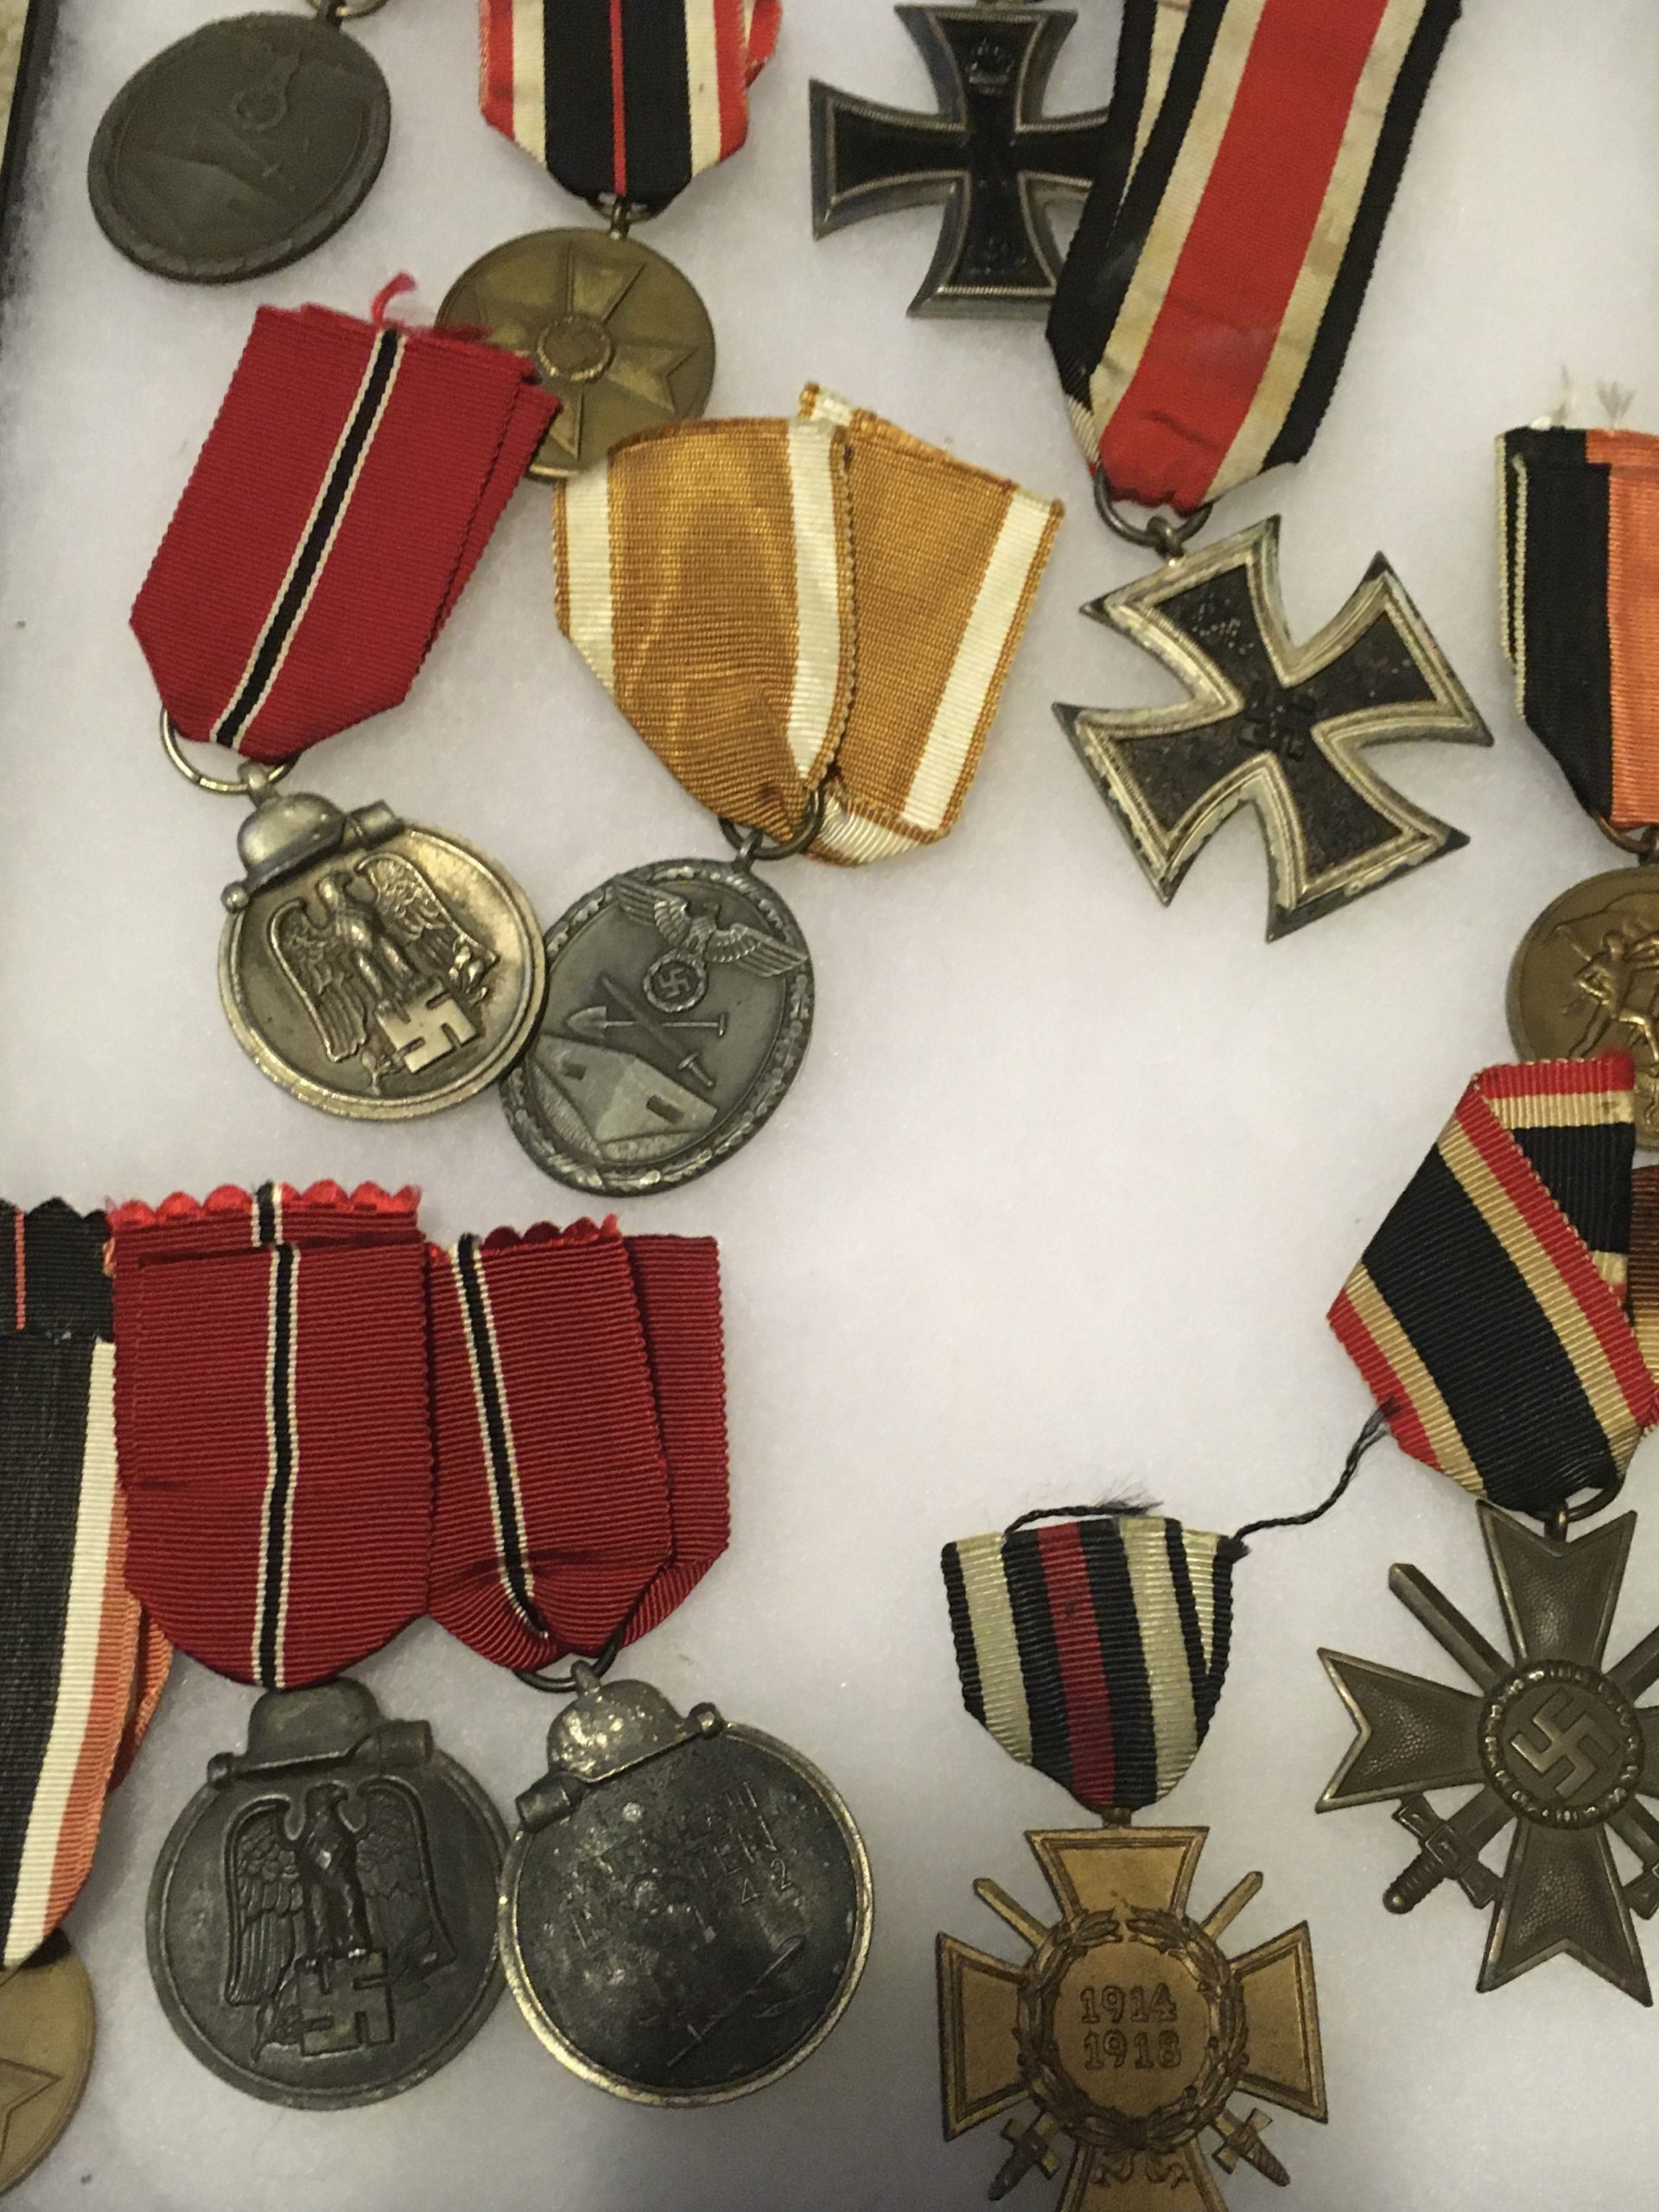 Should You or Shouldn’t You Clean Your Medal Collection